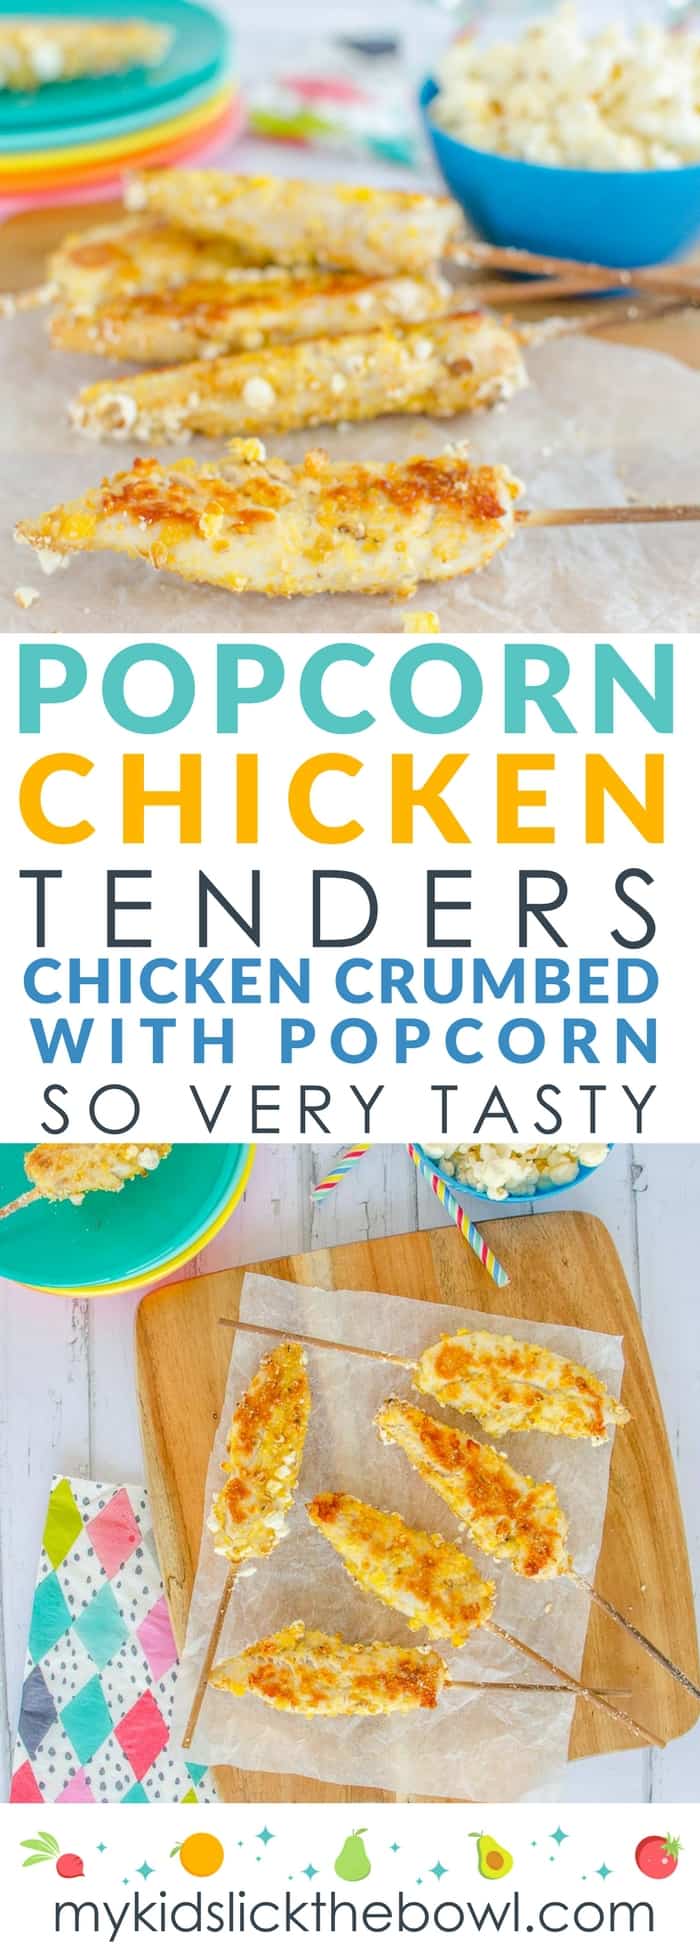 Popcorn chicken tenders healthy baked chicken nuggets breaded with Popcorn. Gluten free allergy friendly, Popcorn chicken tenders a homemade easy recipe which is a great alternative to commercial chicken nuggets